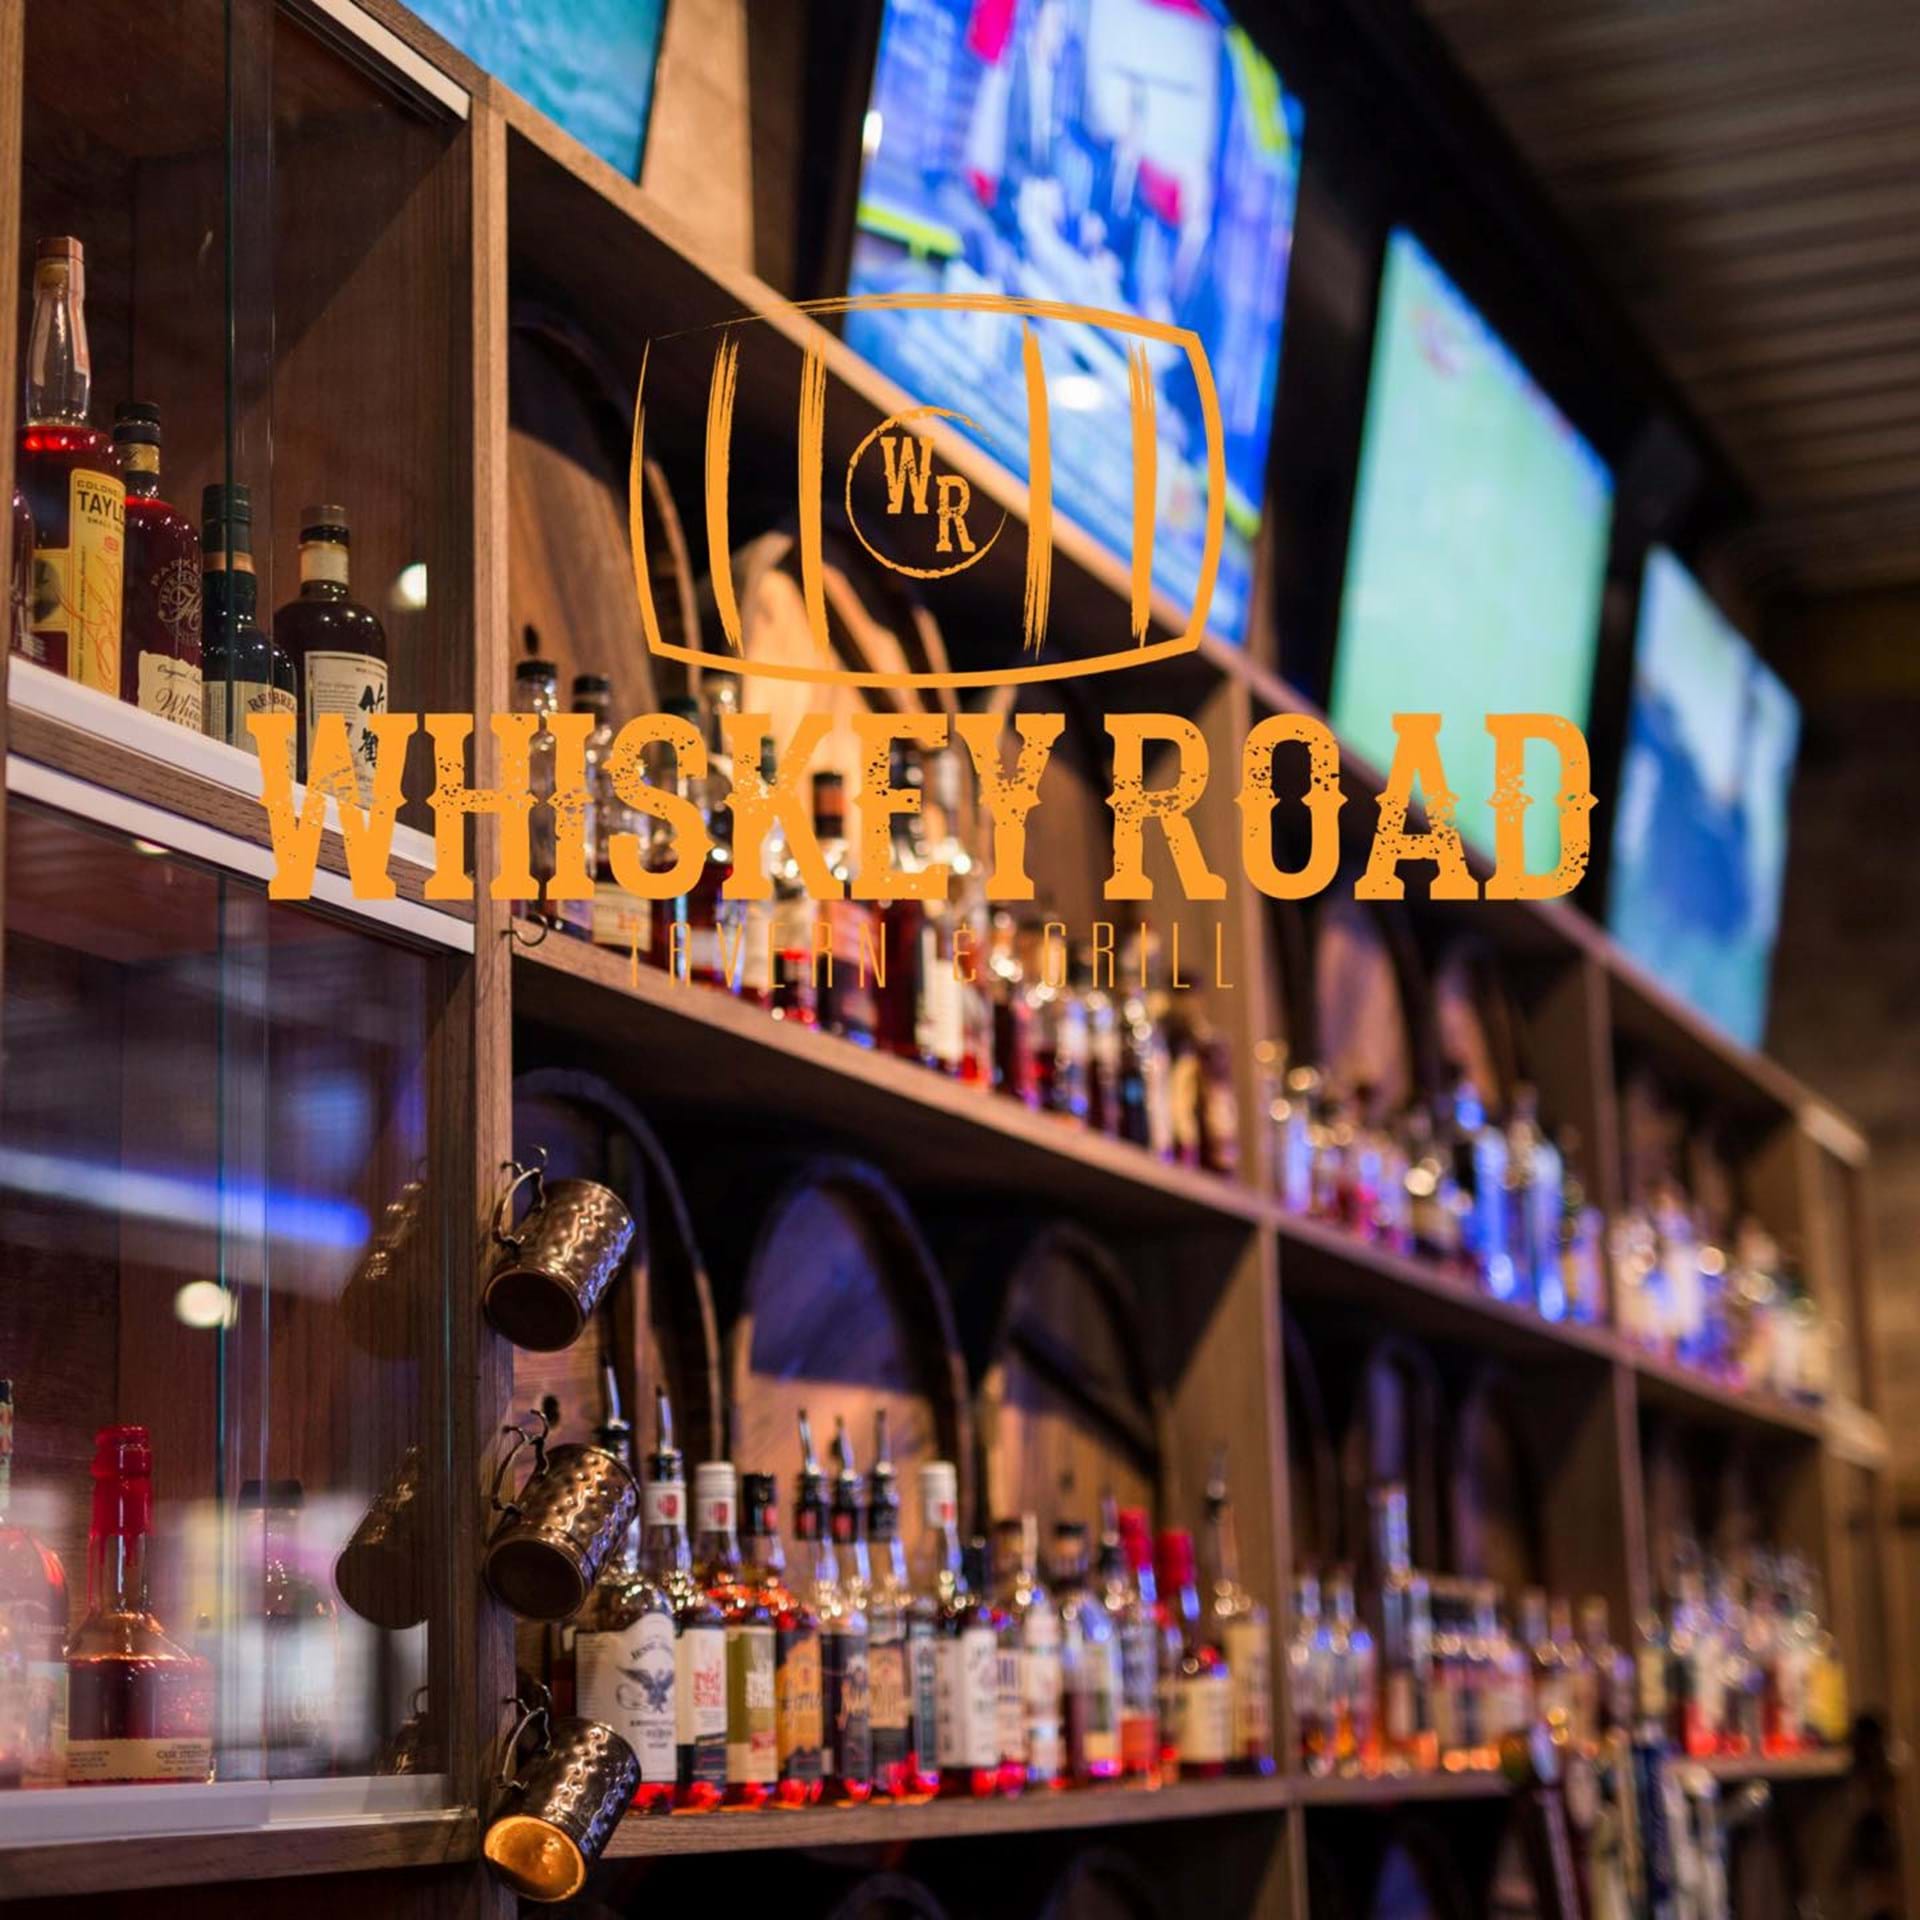 Enjoy a pour from their large whiskey selection!